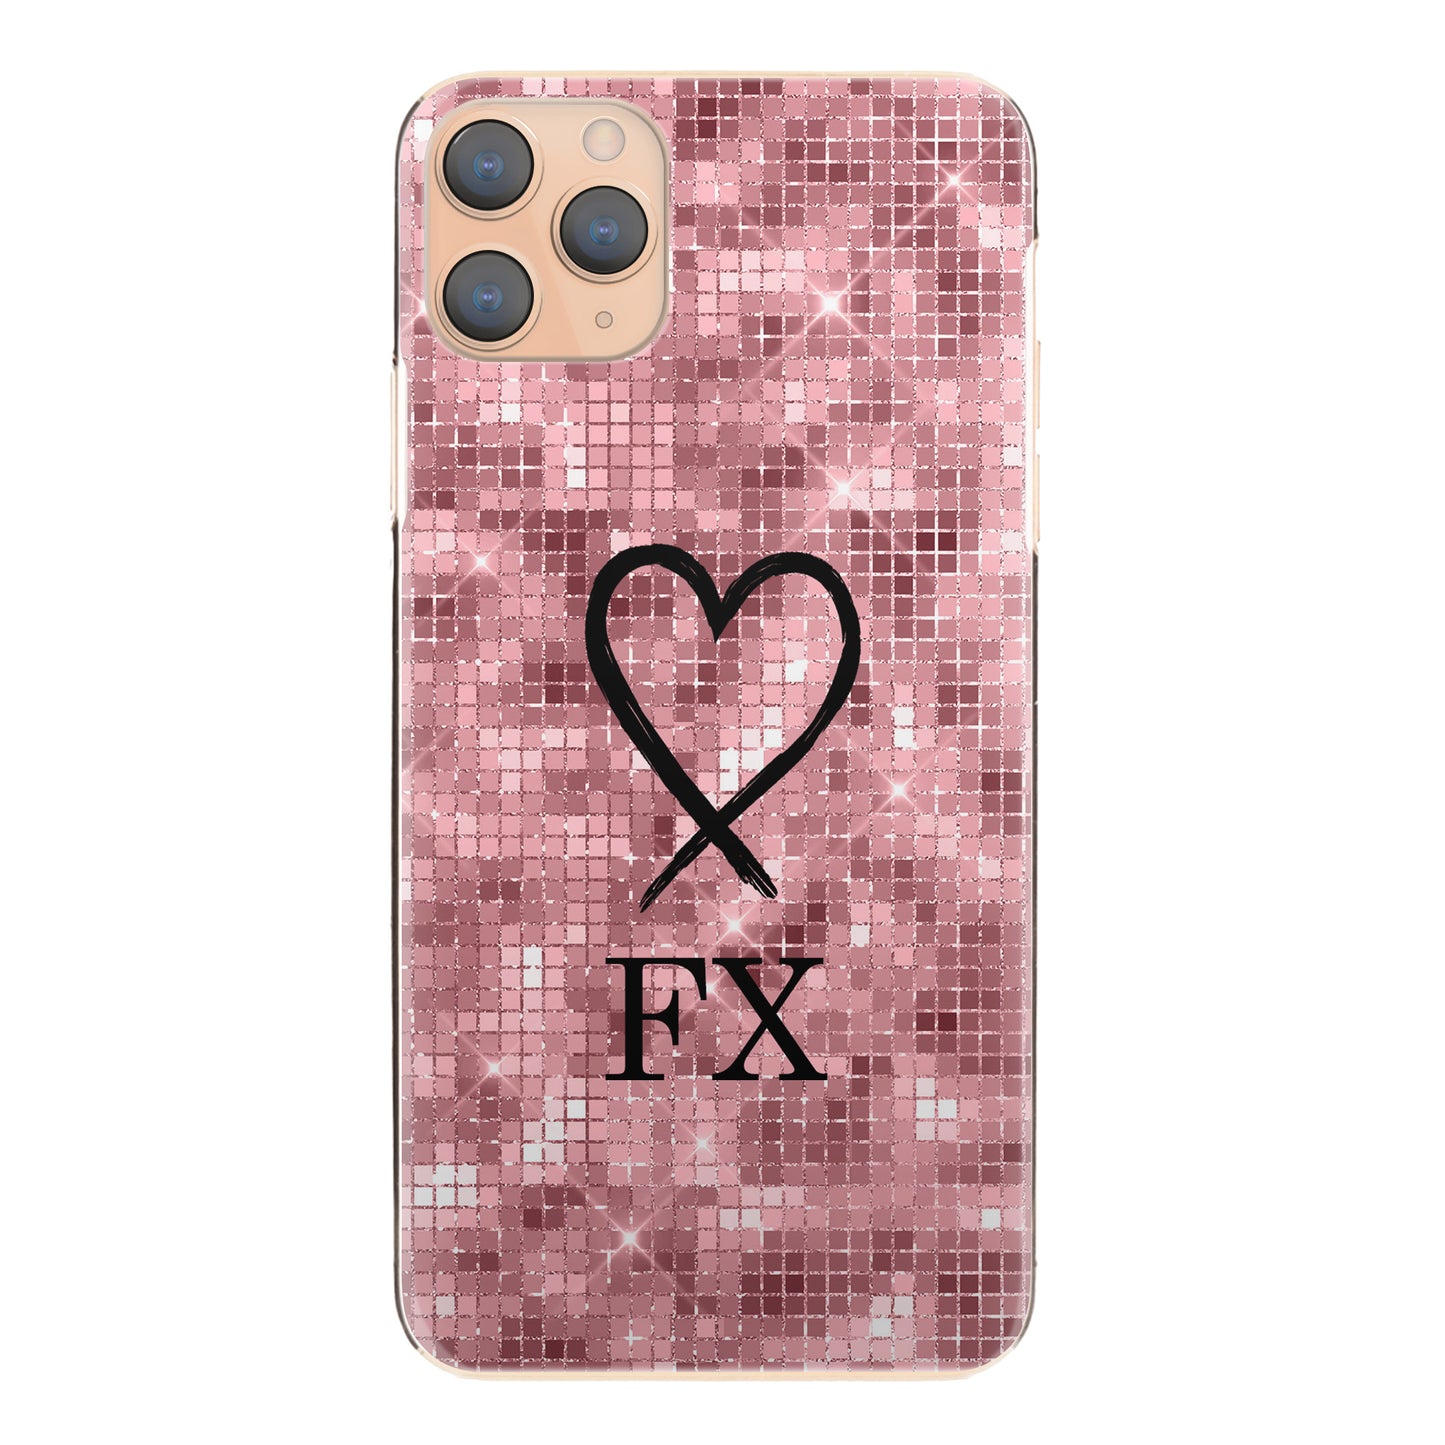 Personalised Nokia Phone Hard Case with Heart Sketch and Initials on Pink Disco Ball